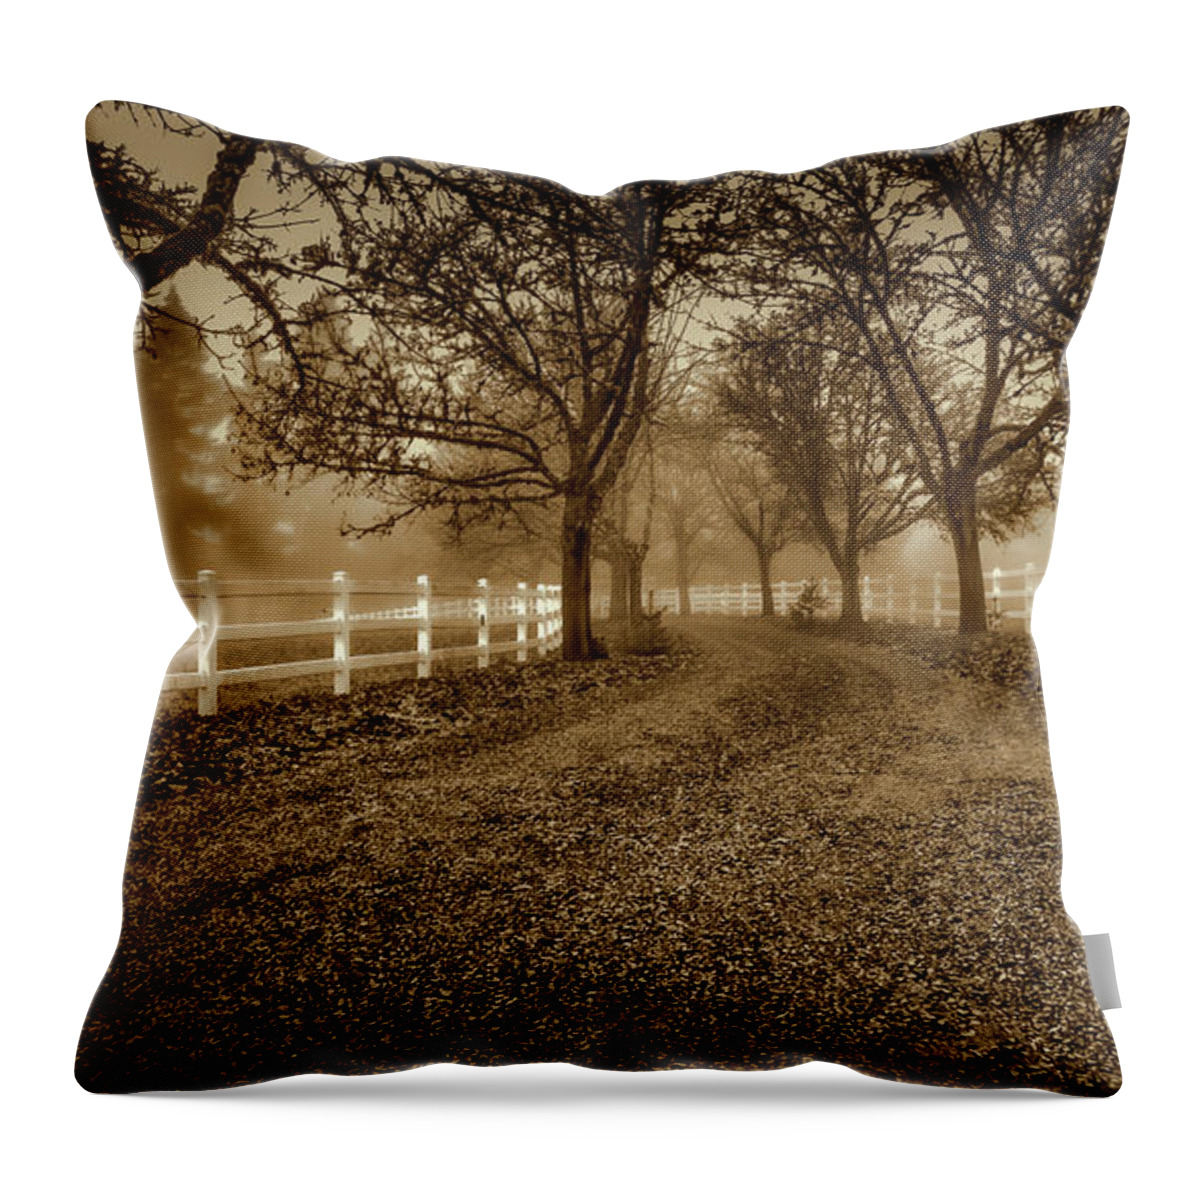 Country Road Throw Pillow featuring the photograph The Road Less Traveled by Don Schwartz